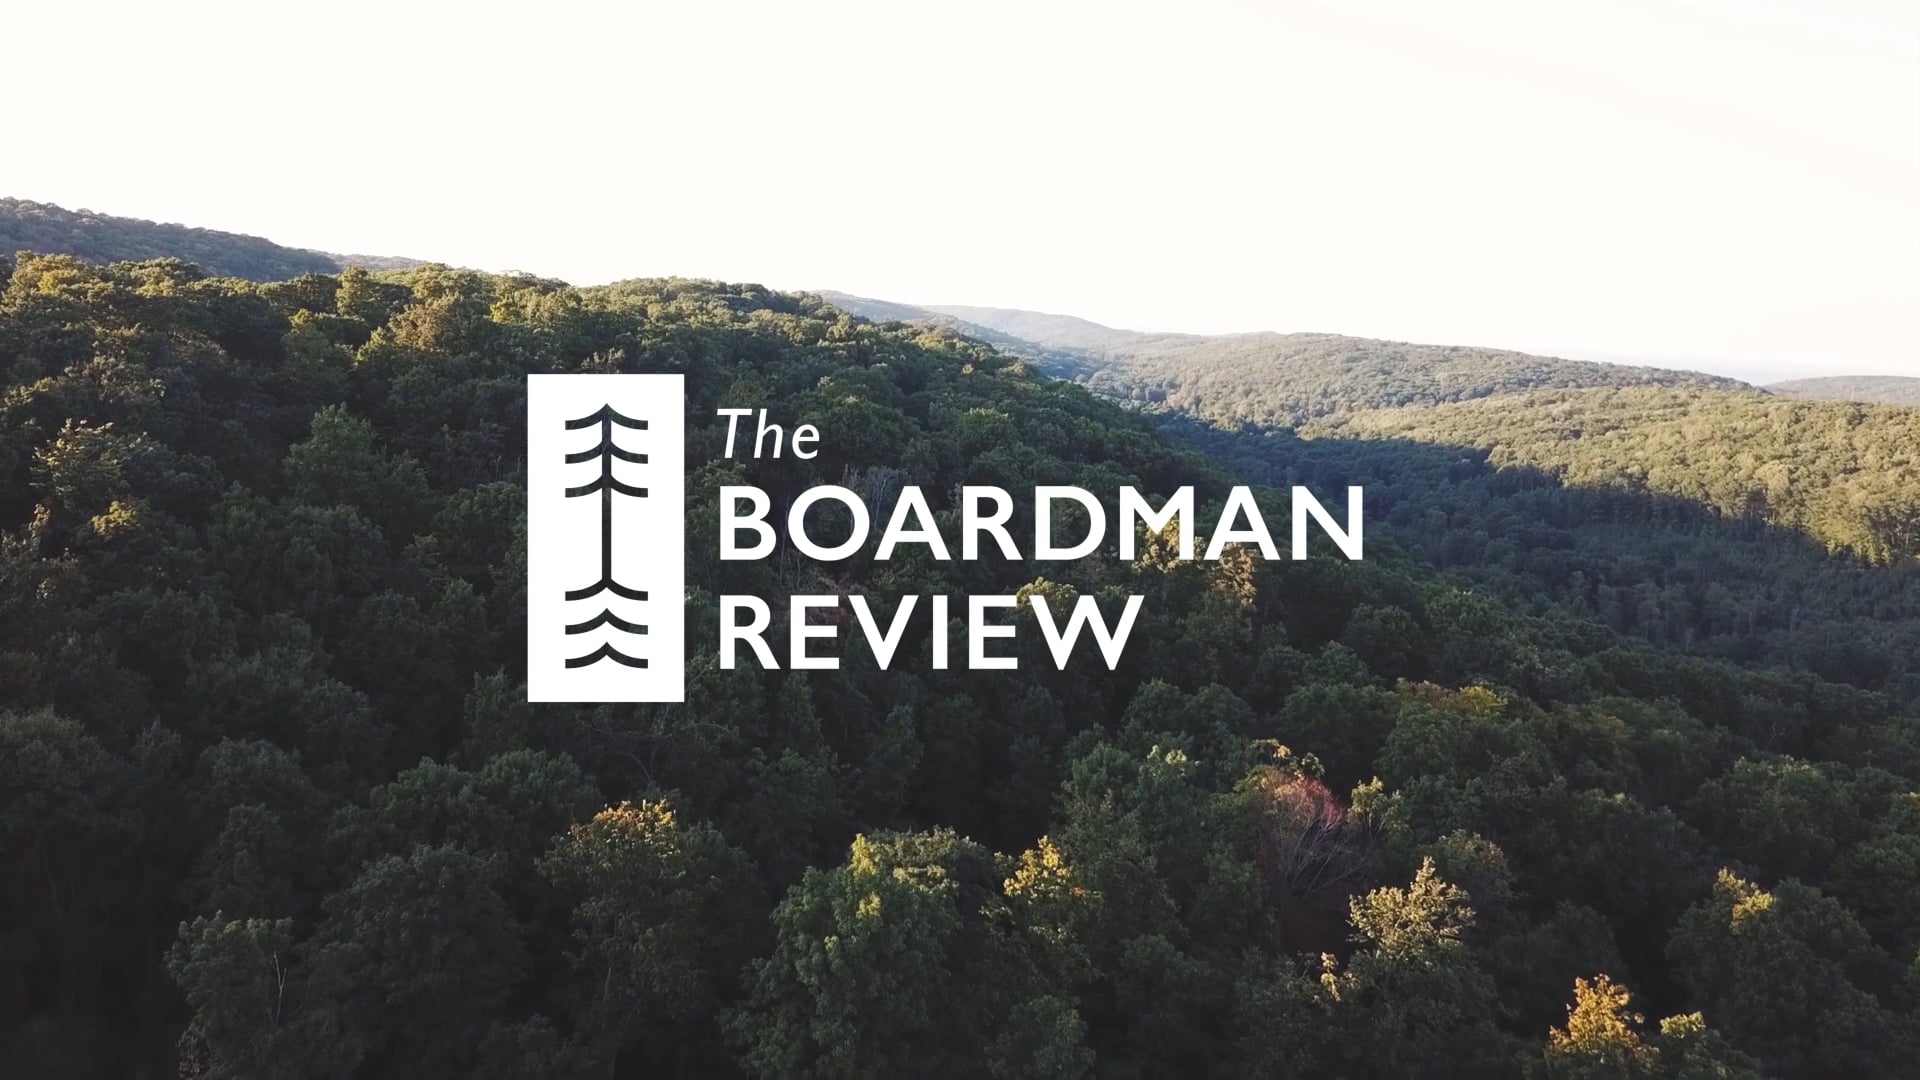 The Boardman Review - Two Years of Highlights